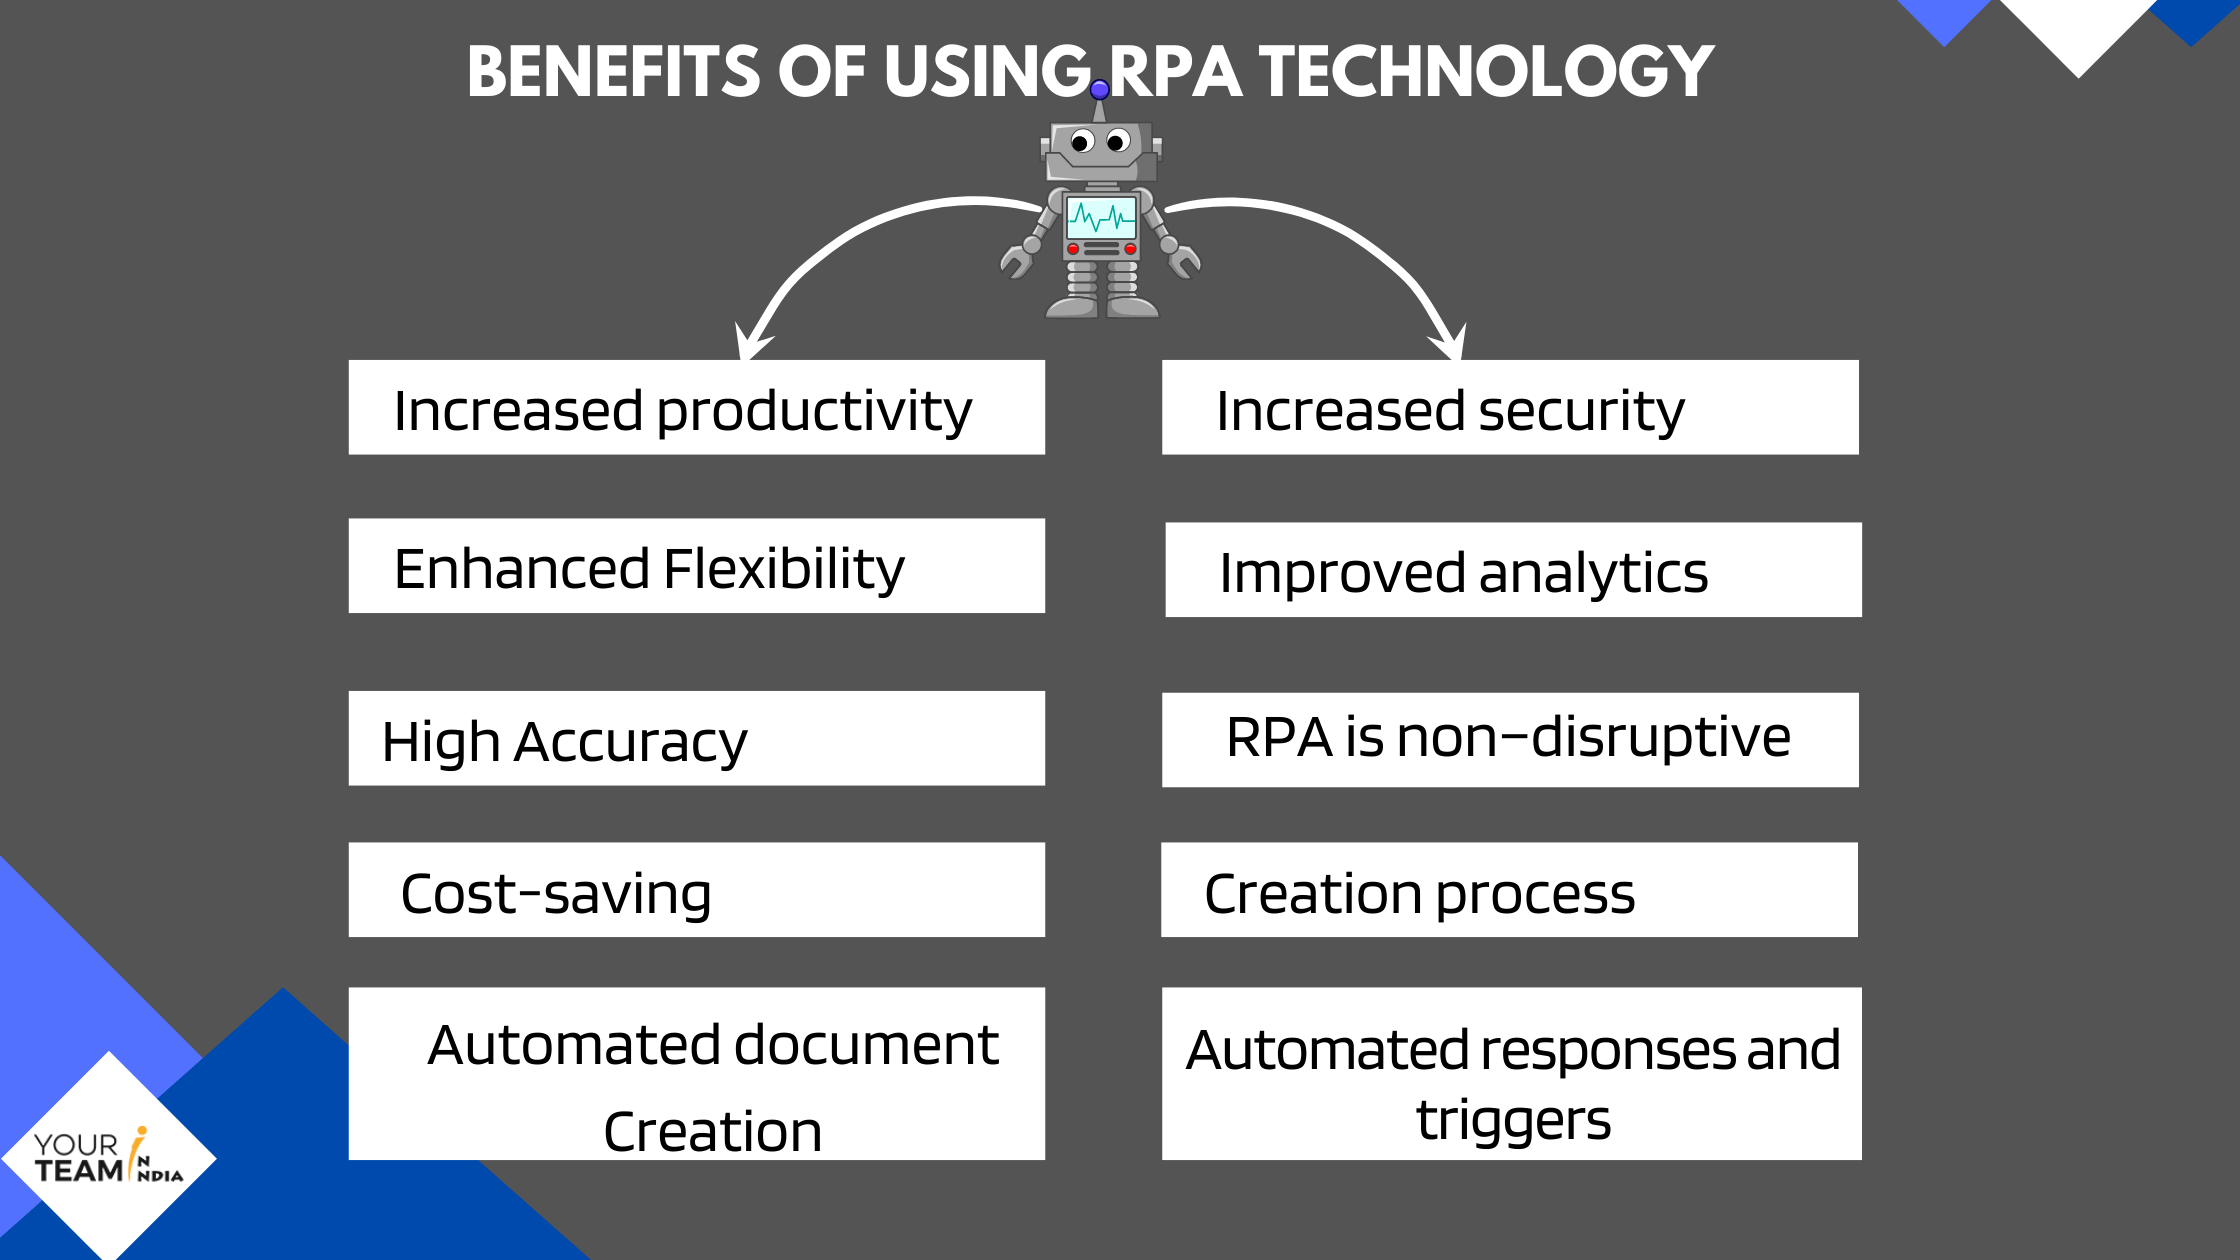 Benefits of using RPA technology